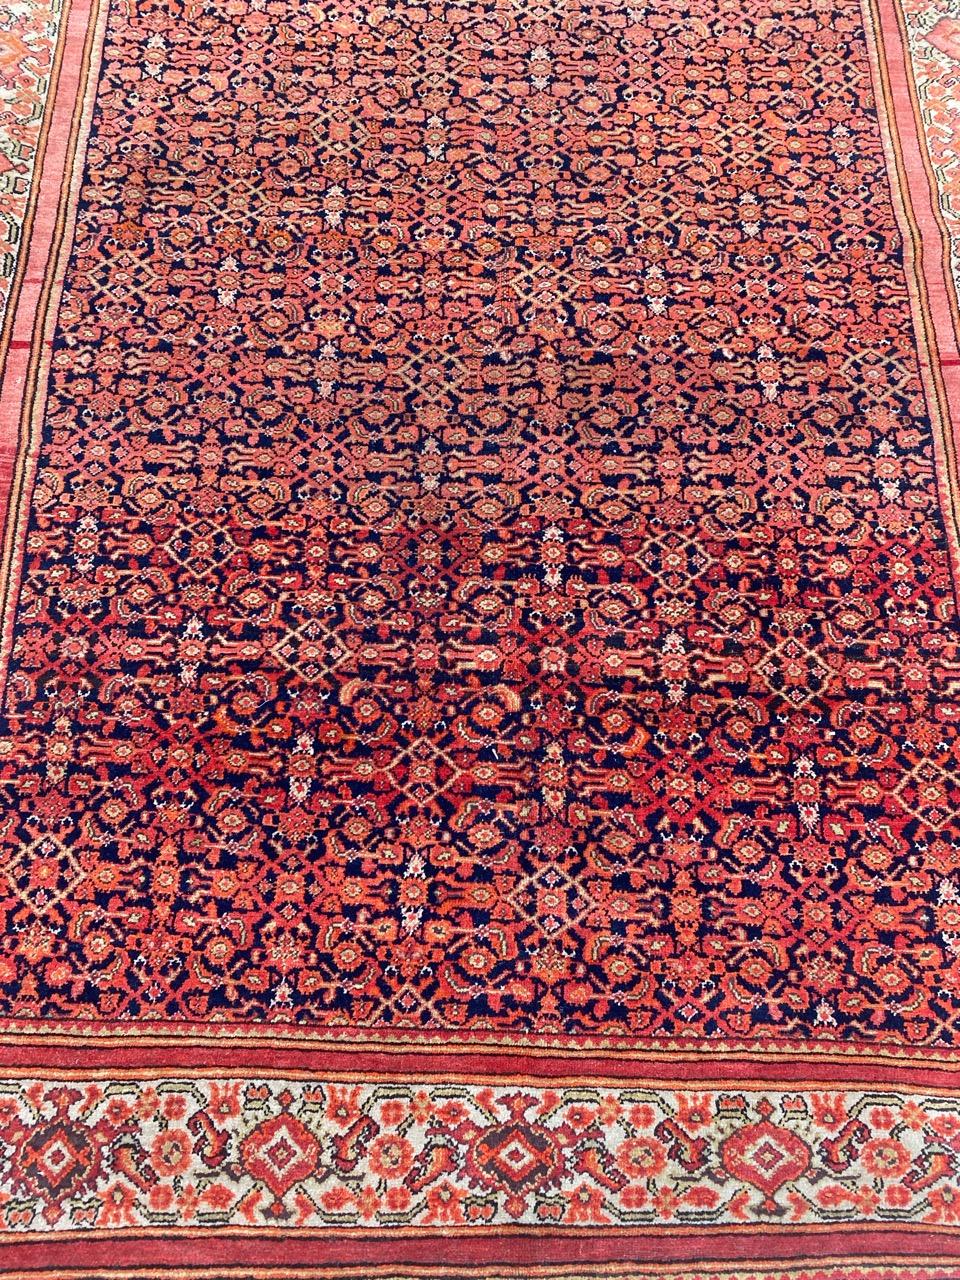 Very beautiful late 19th century Malayer rug with nice Herati design and beautiful natural colors, entirely and finely hand knotted with wool velvet on cotton foundation.

✨✨✨
